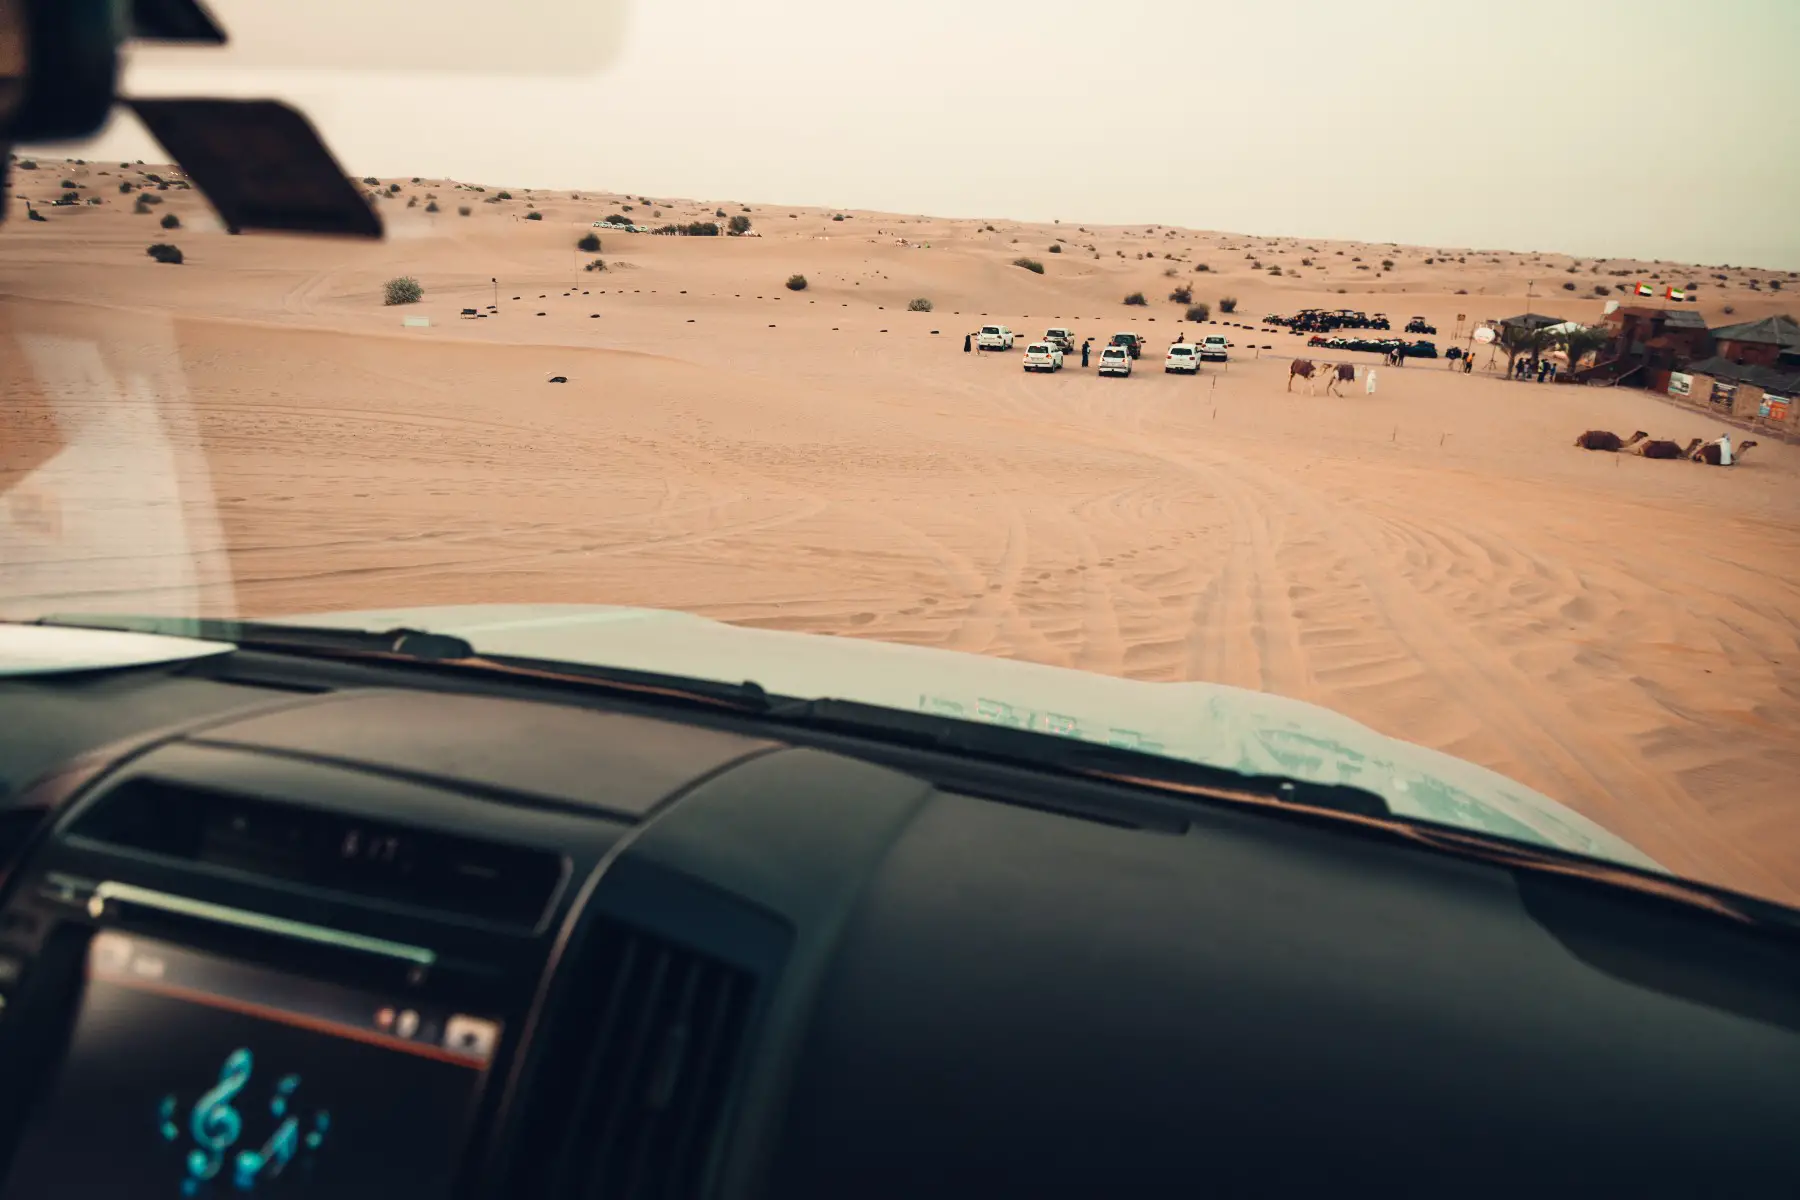 Driving off-road to a camp with camels.